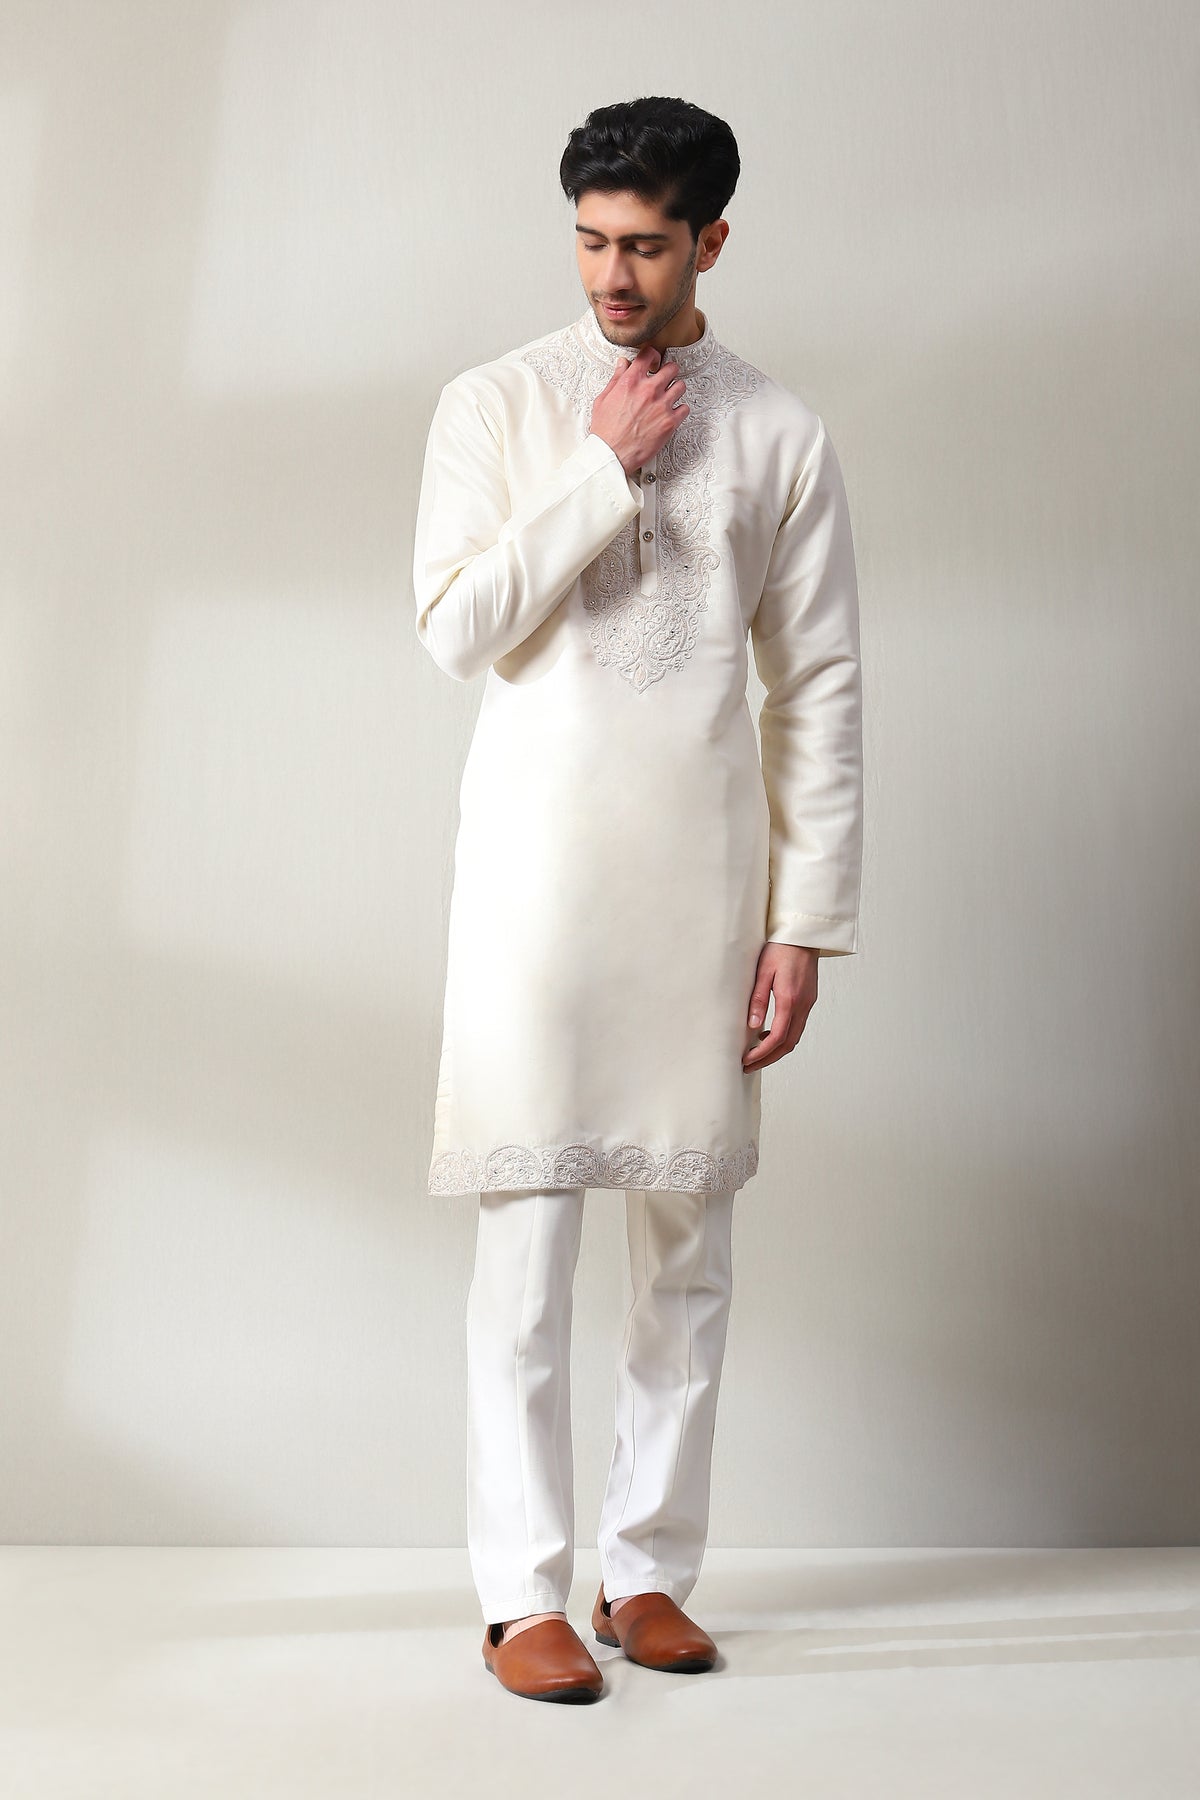 This ivory kurta is handspun with the pants